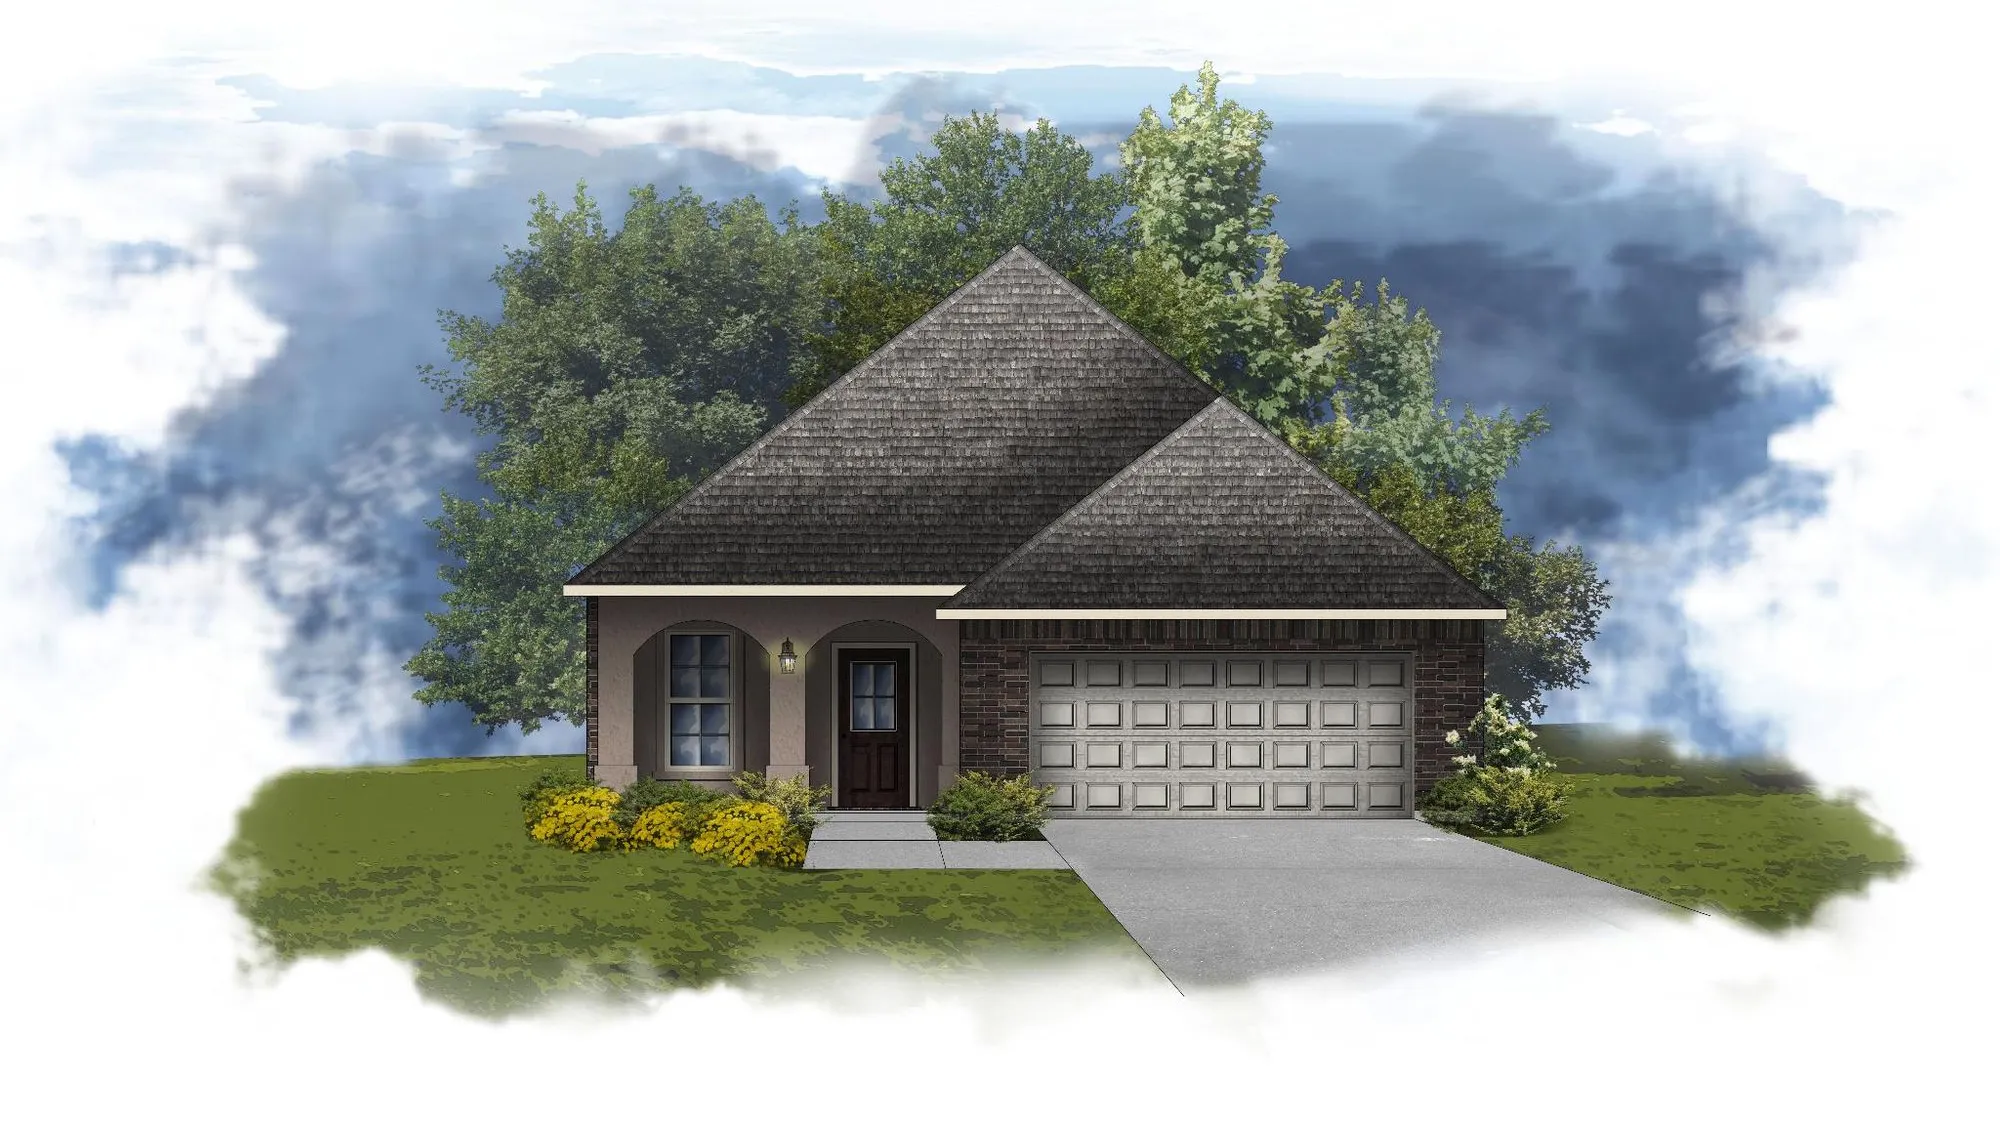 New Homes for Sale in Robertsdale, AL by DSLD Homes